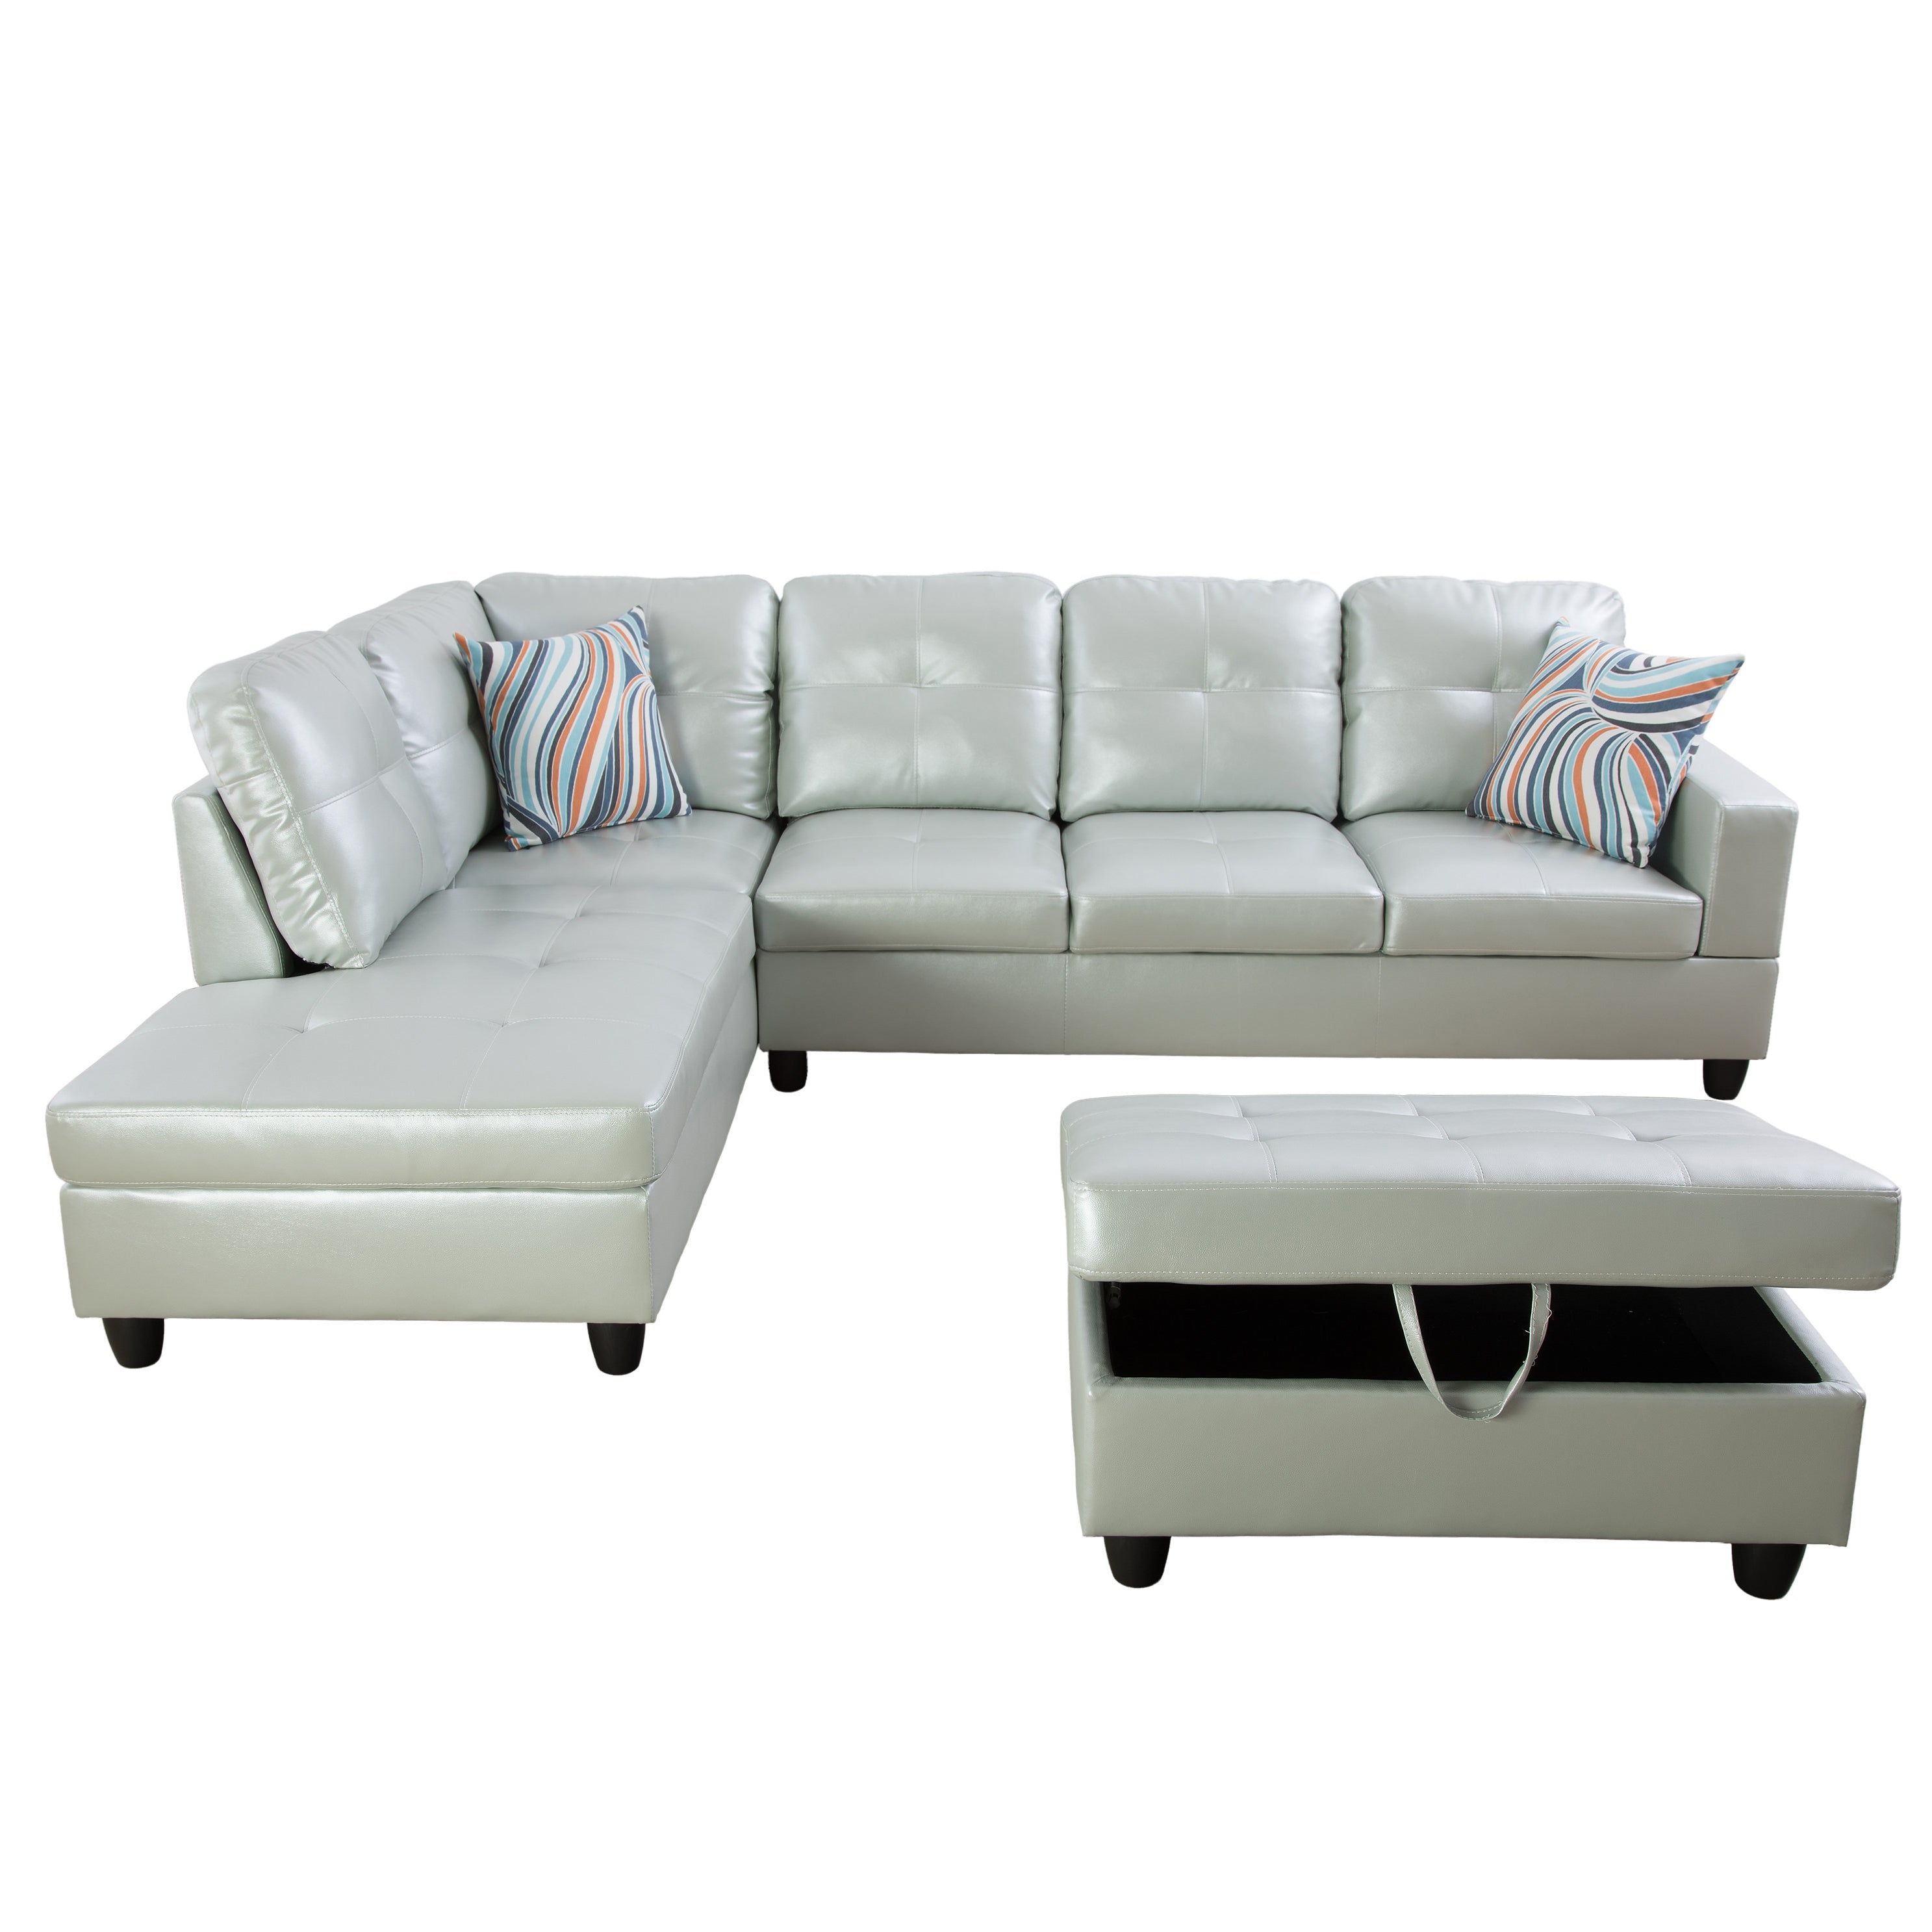 Ainehome Silver Green L-Shaped Leather Combo Sofa Set